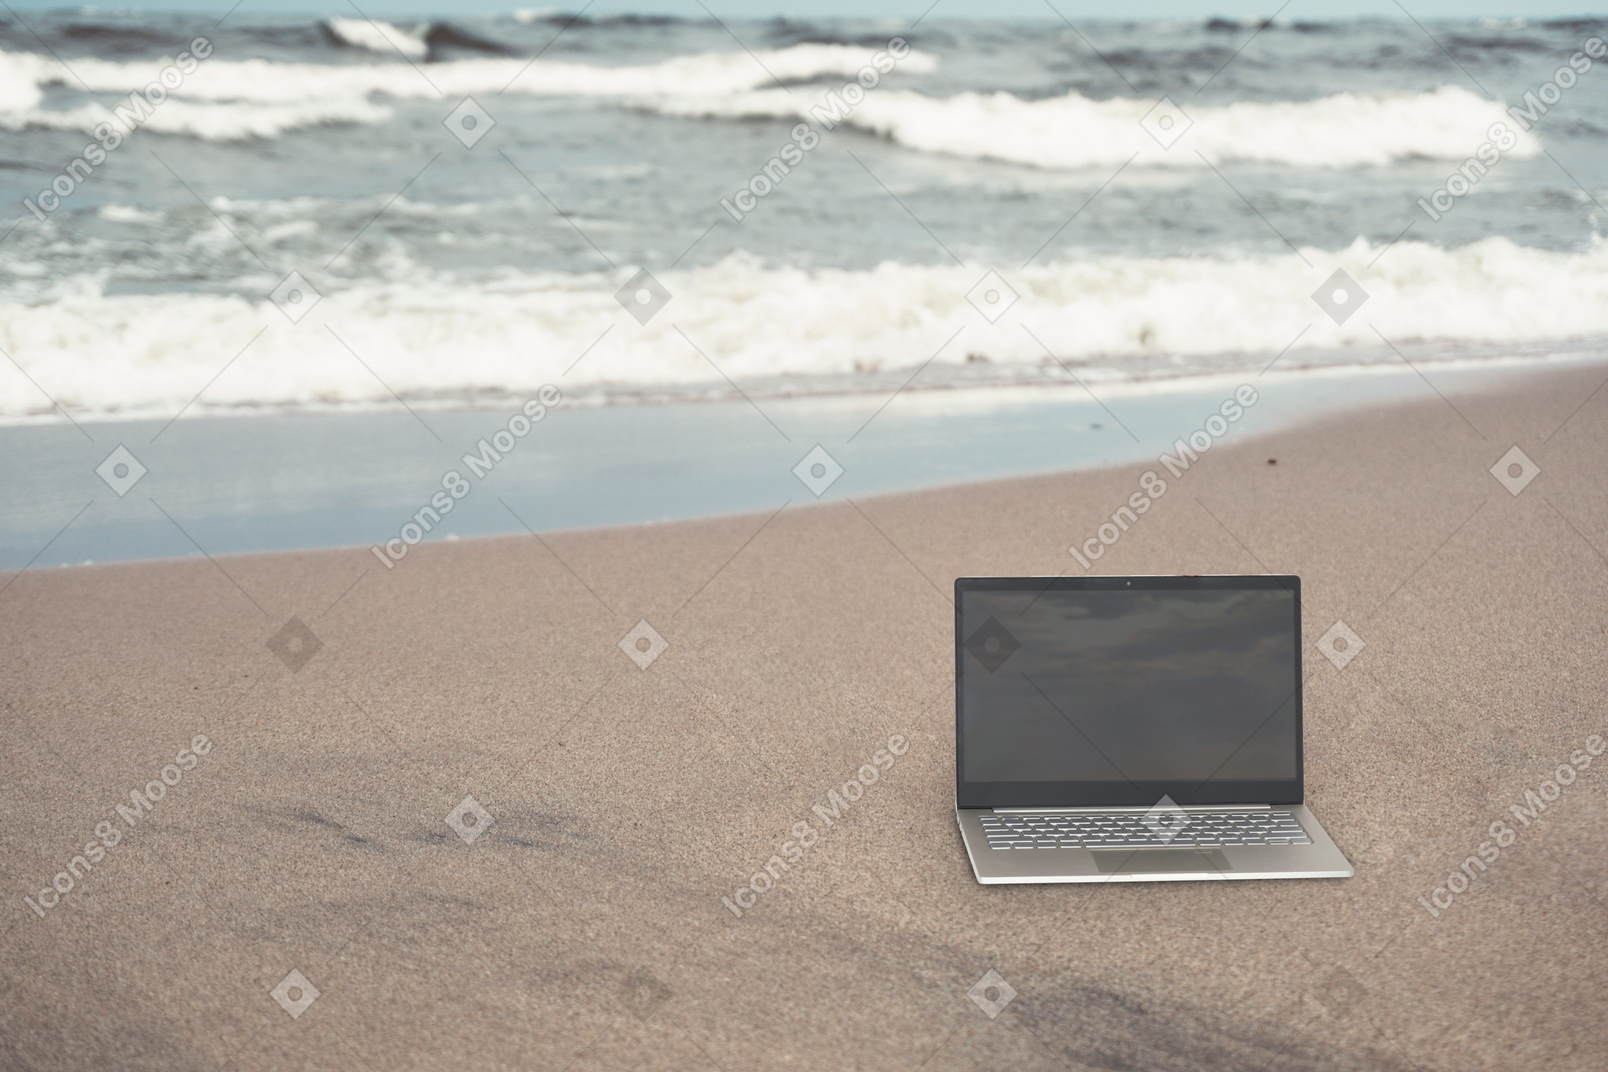 Blogging at the beach